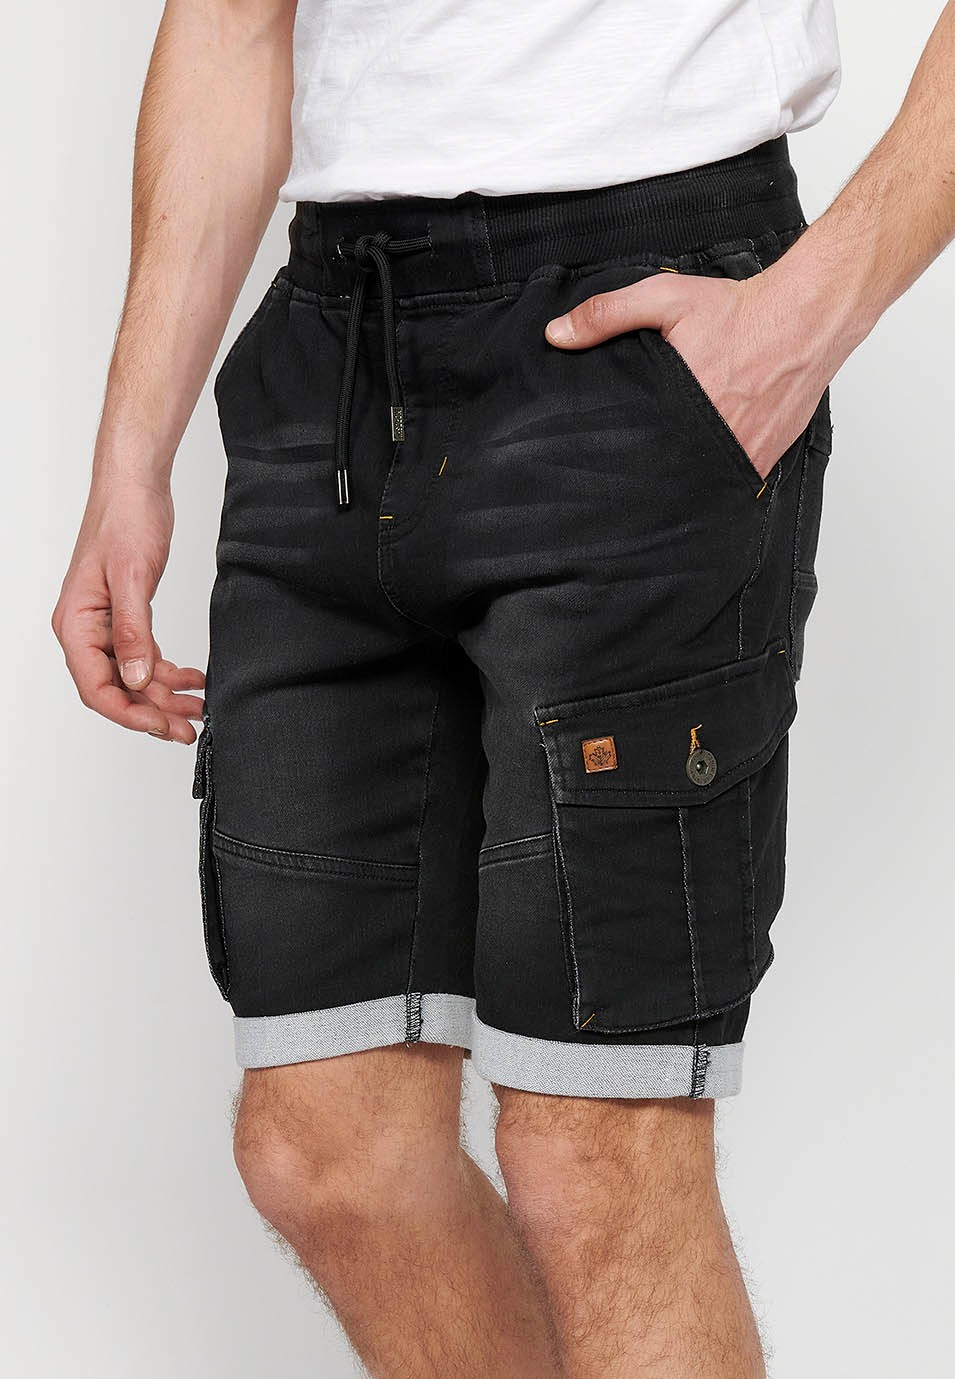 Denim Bermuda cargo jogger shorts finished with a turn-up, Adjustable waist with elastic and drawstring, Side pockets with flap, Black for Men 2